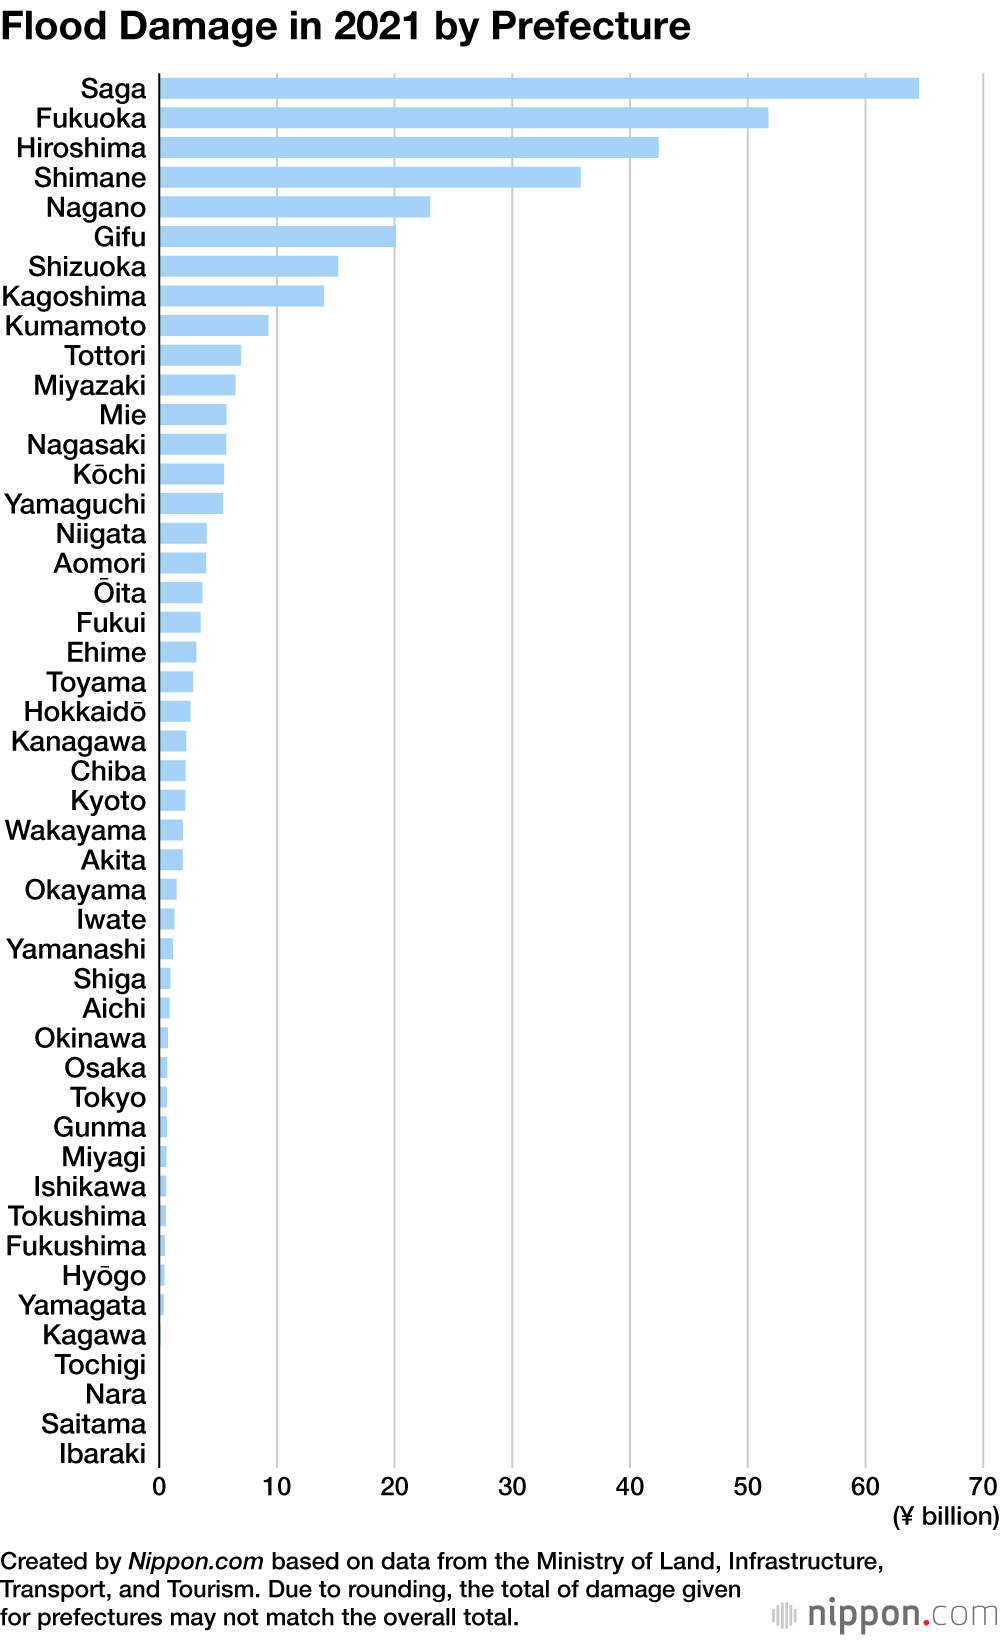 Flood Damage in 2021 by Prefecture